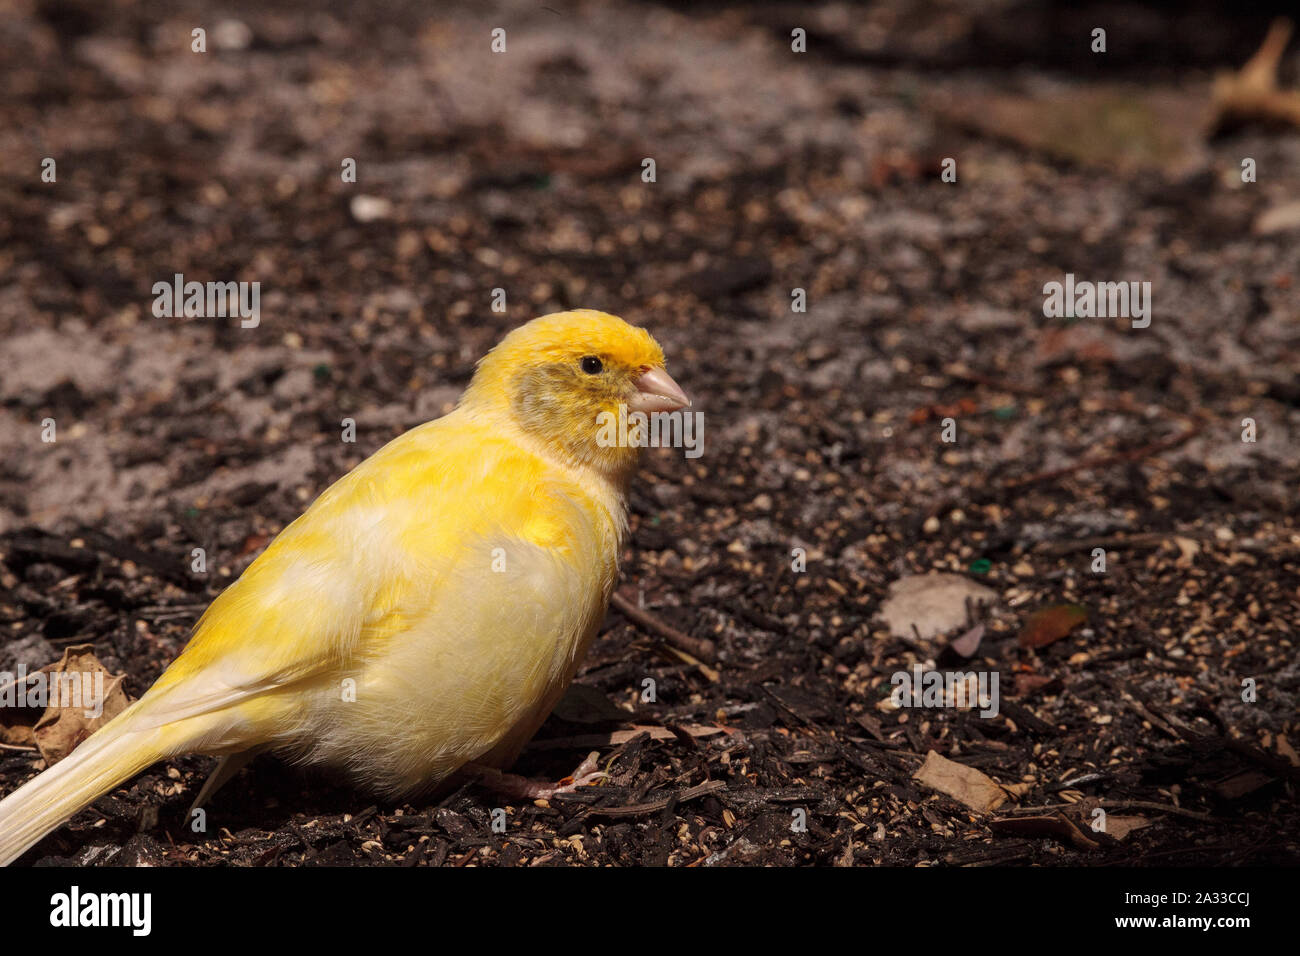 Yellow canary Serinus canaria endemic to the Canary Islands perches on the ground. Stock Photo